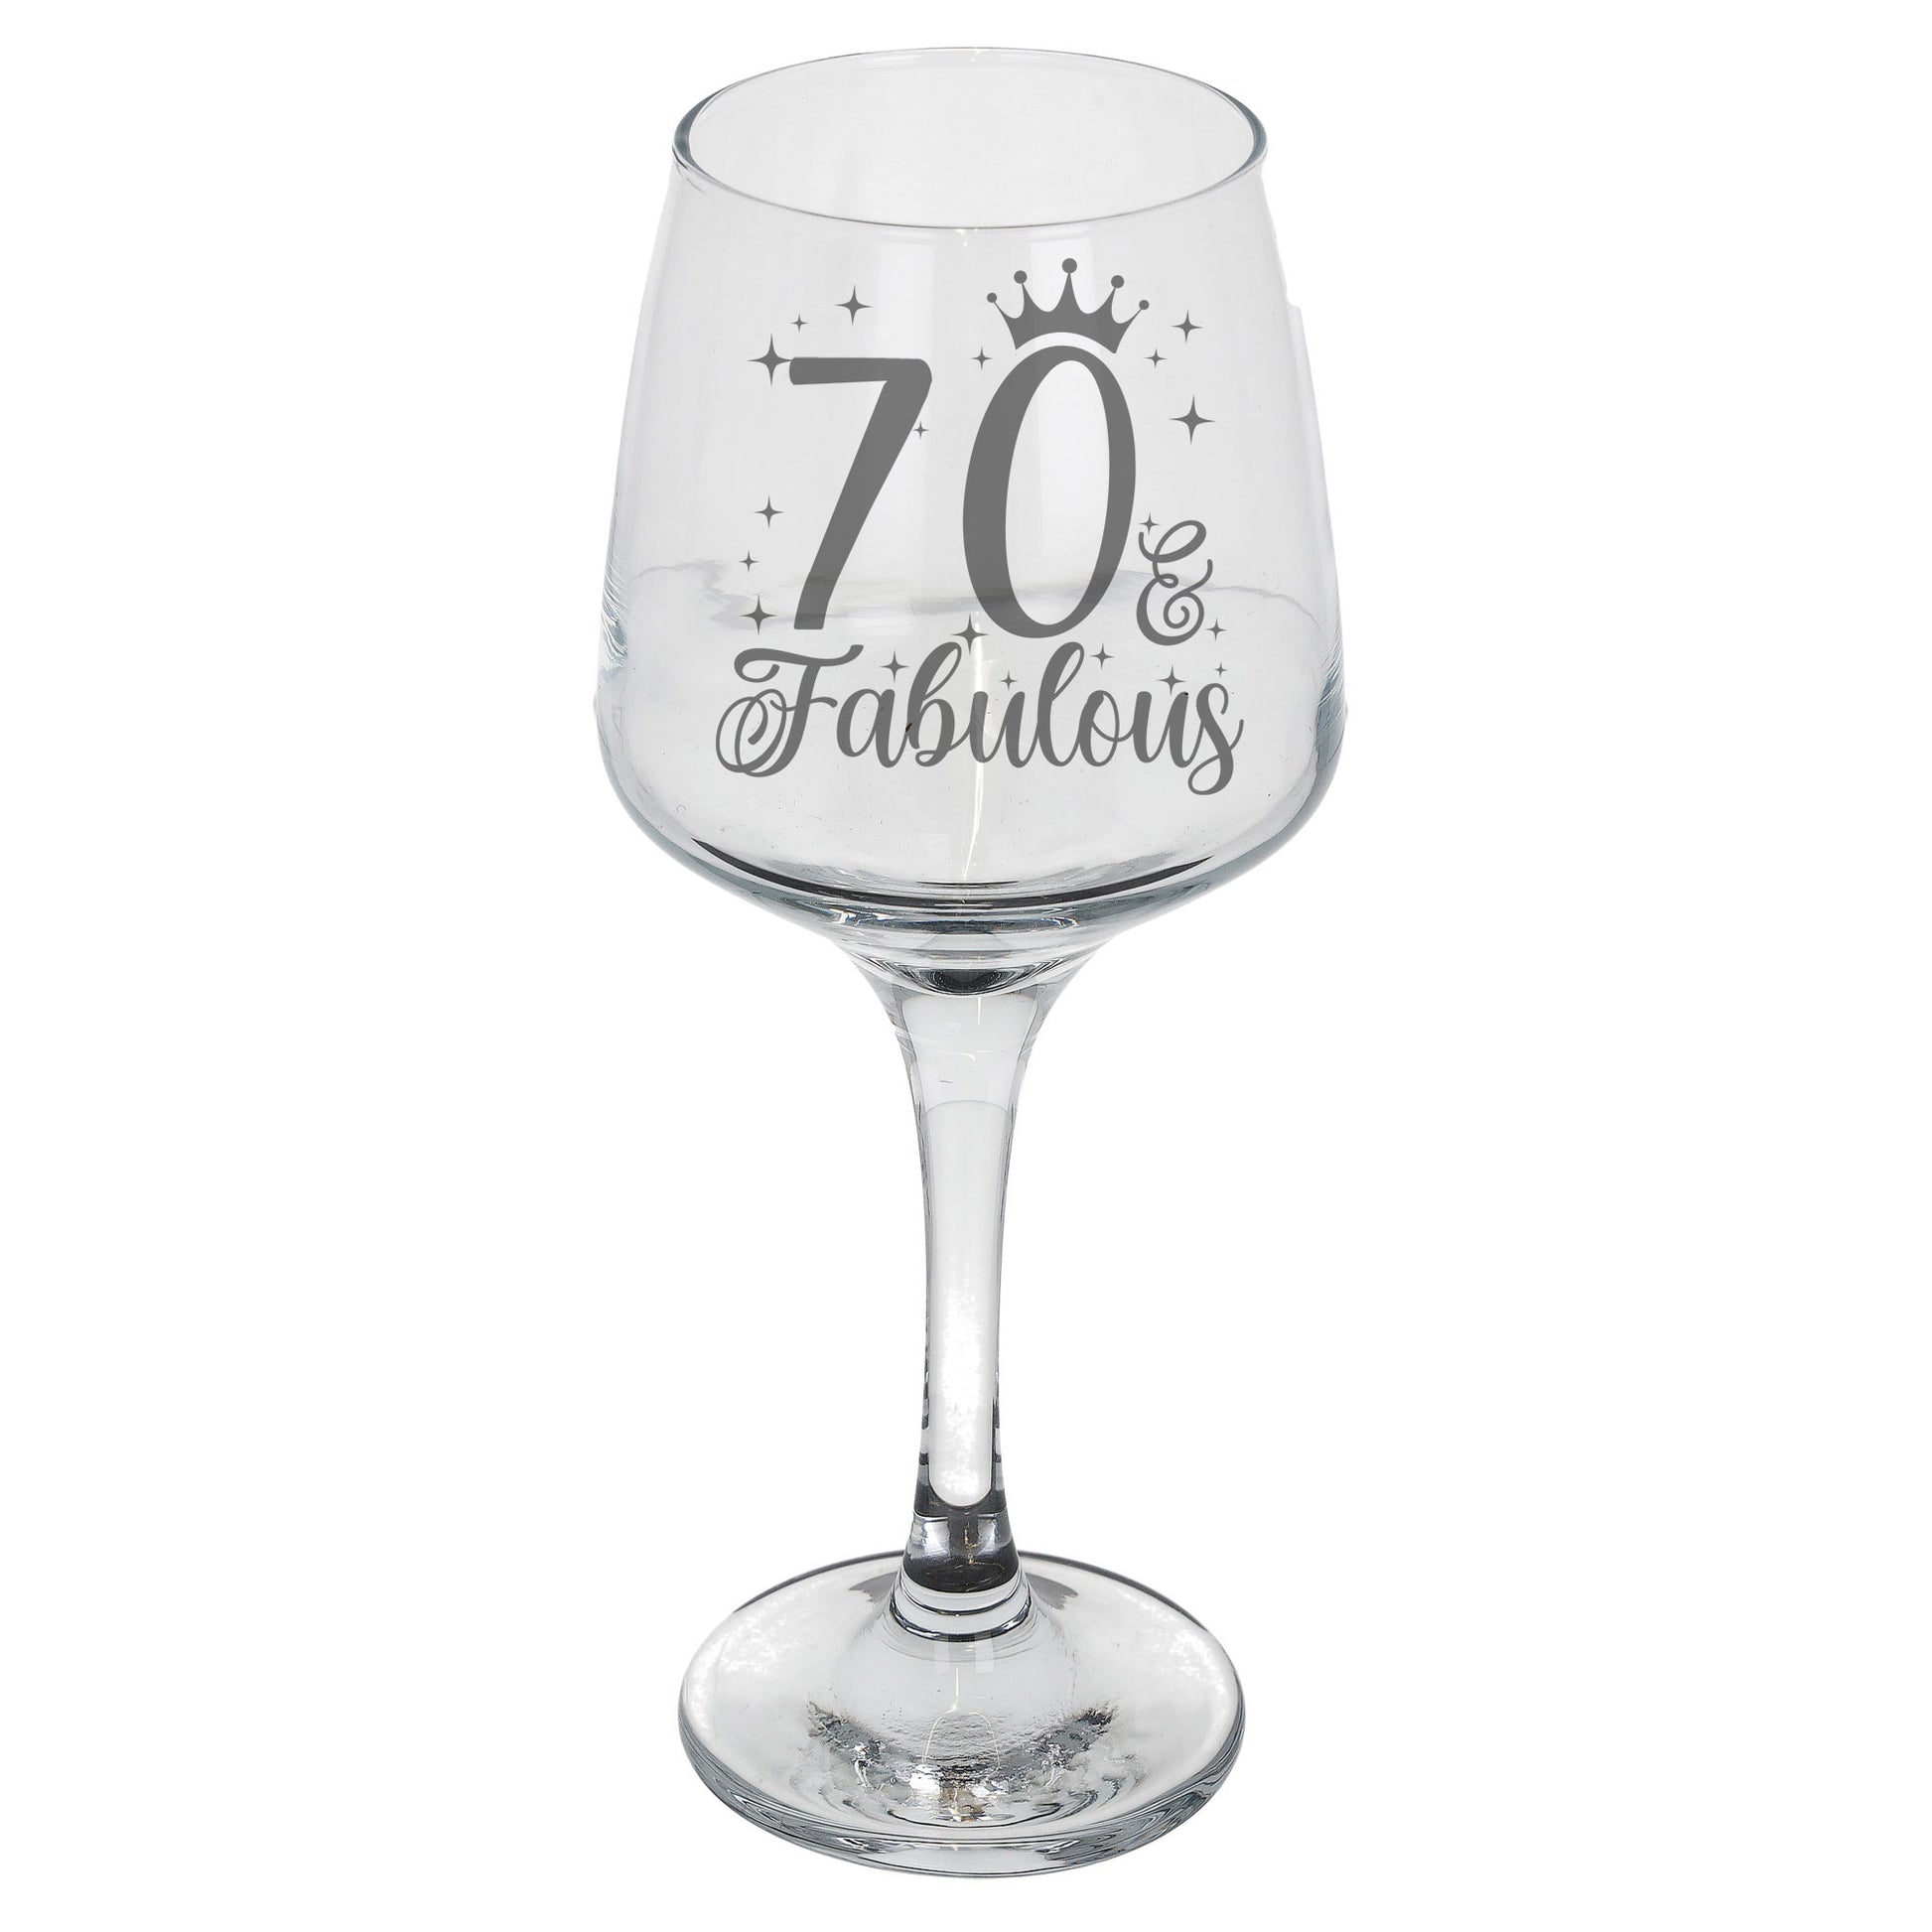 70 & Fabulous 70th Birthday Gift Engraved Wine Glass and/or Coaster Set  - Always Looking Good -   